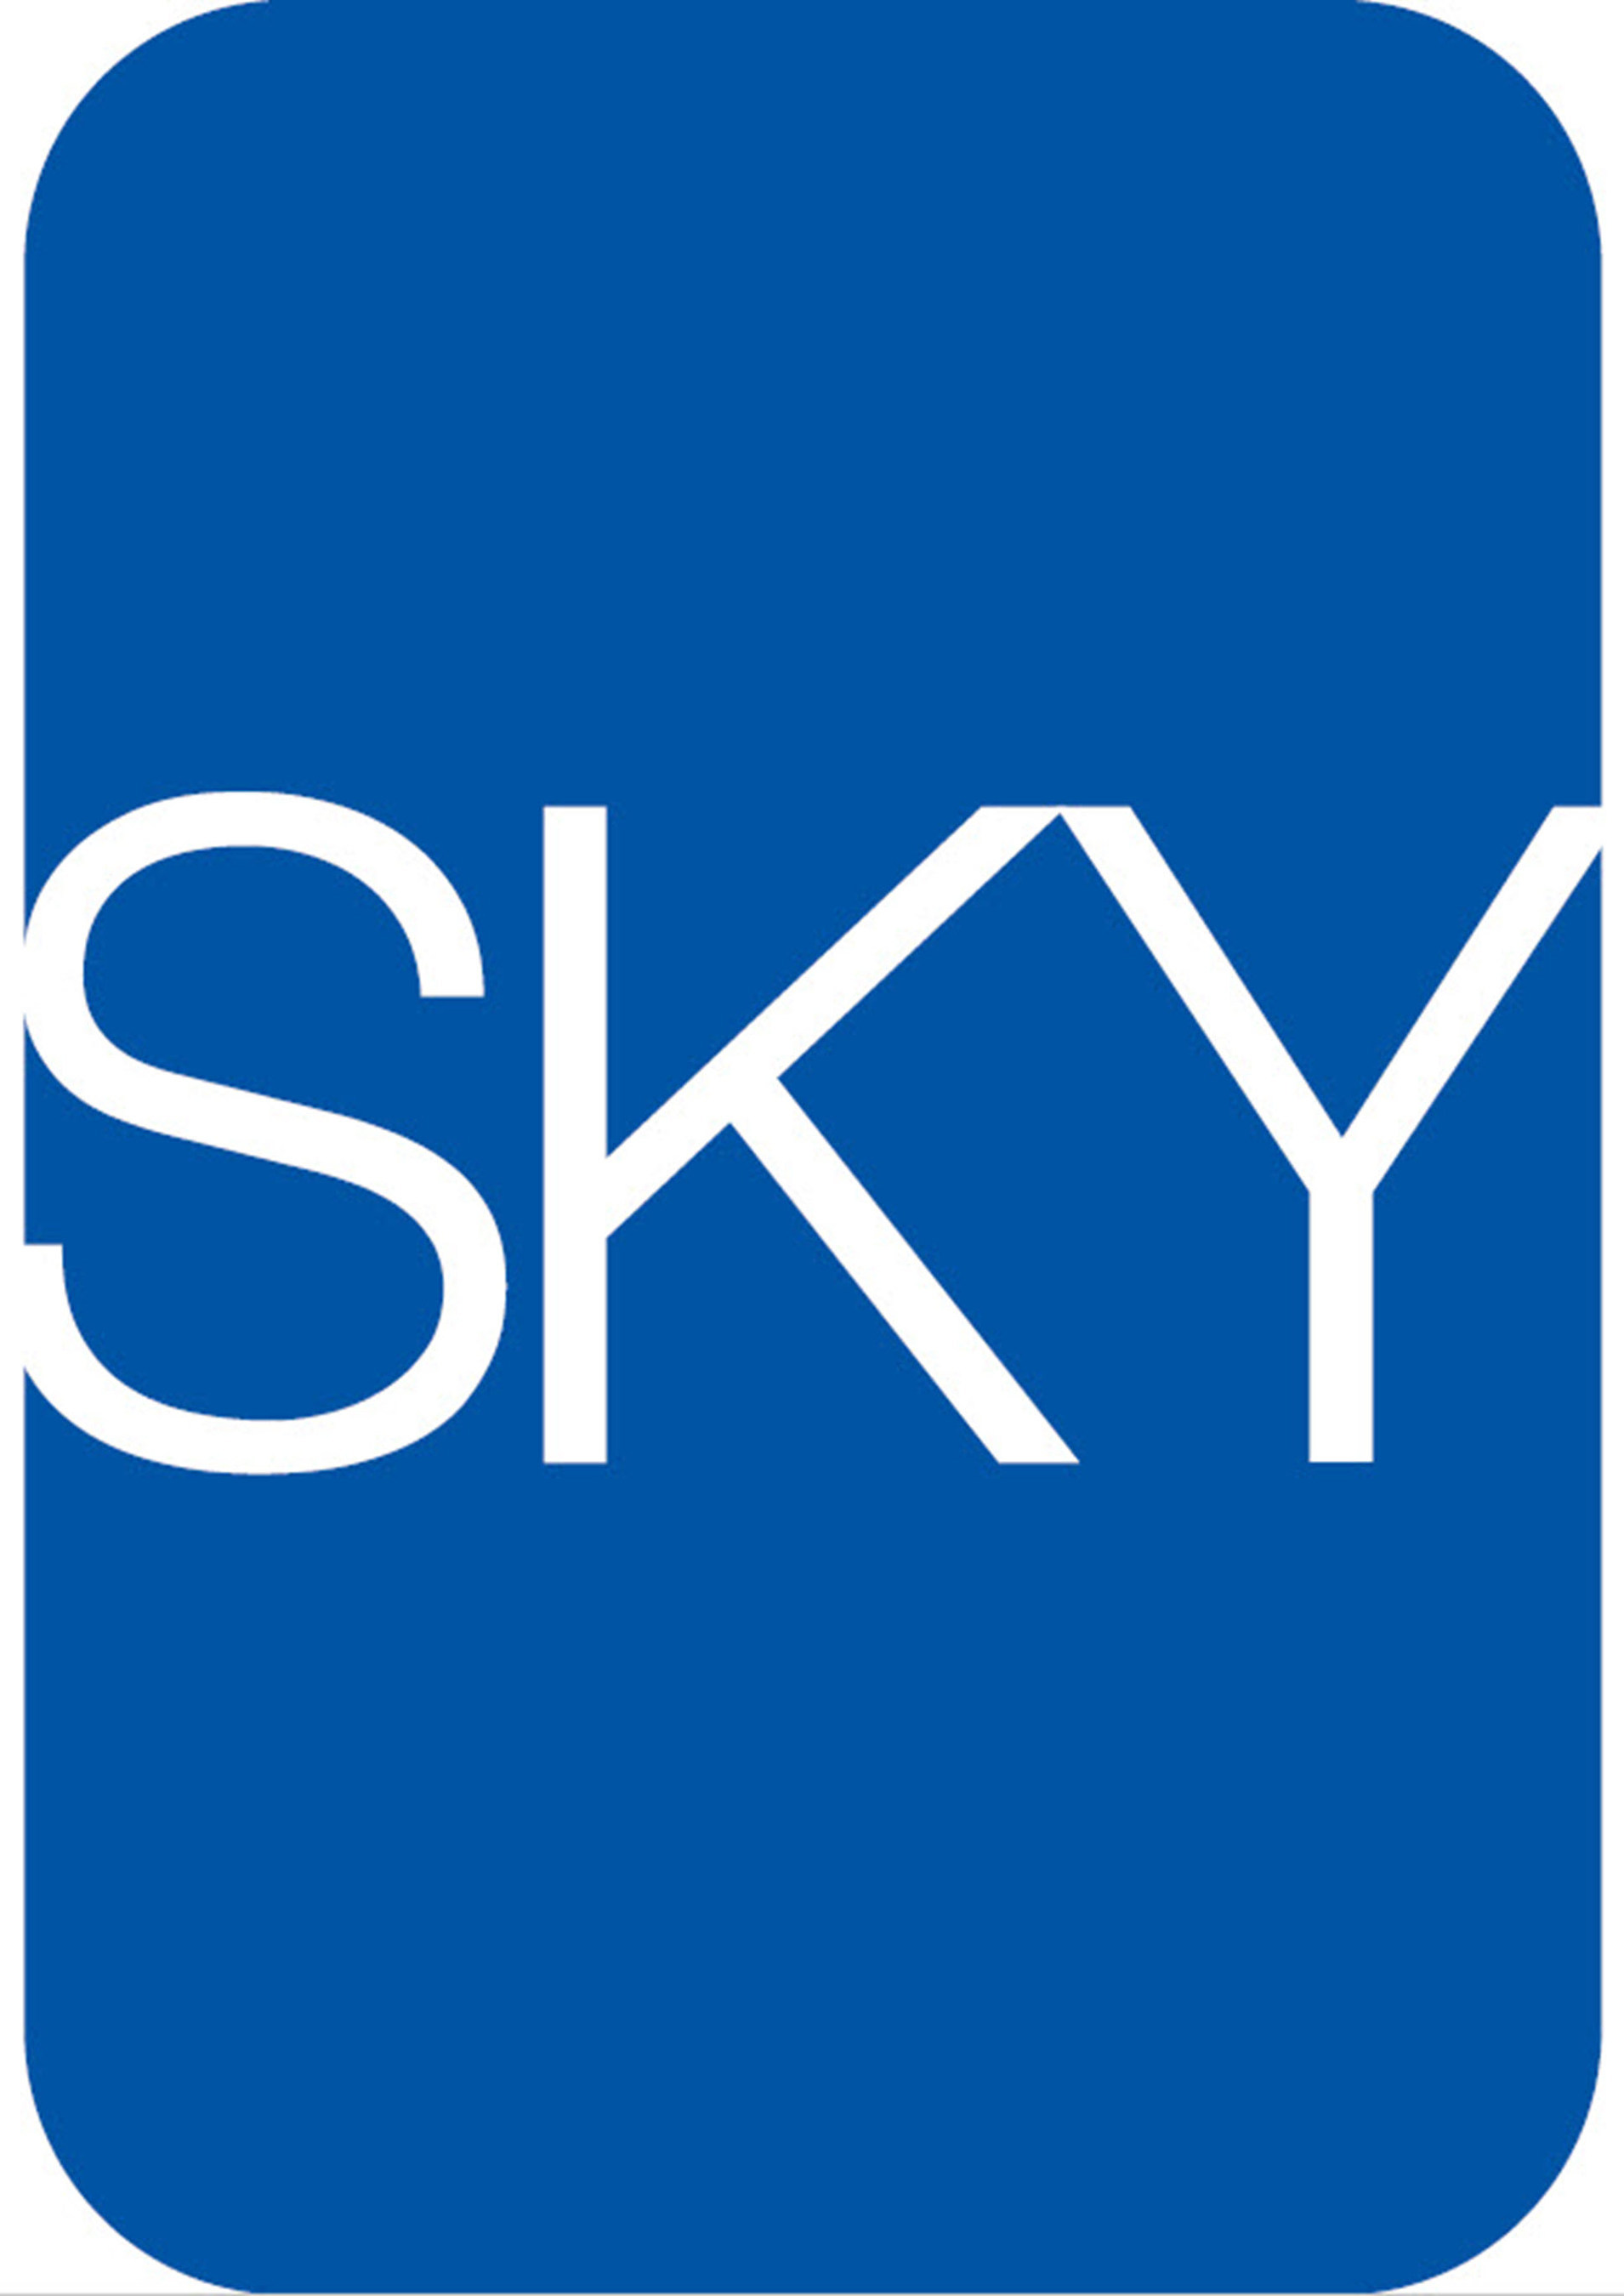 SKY Leasing signs definitive agreement to sell Sky Fund I Irish, Ltd.